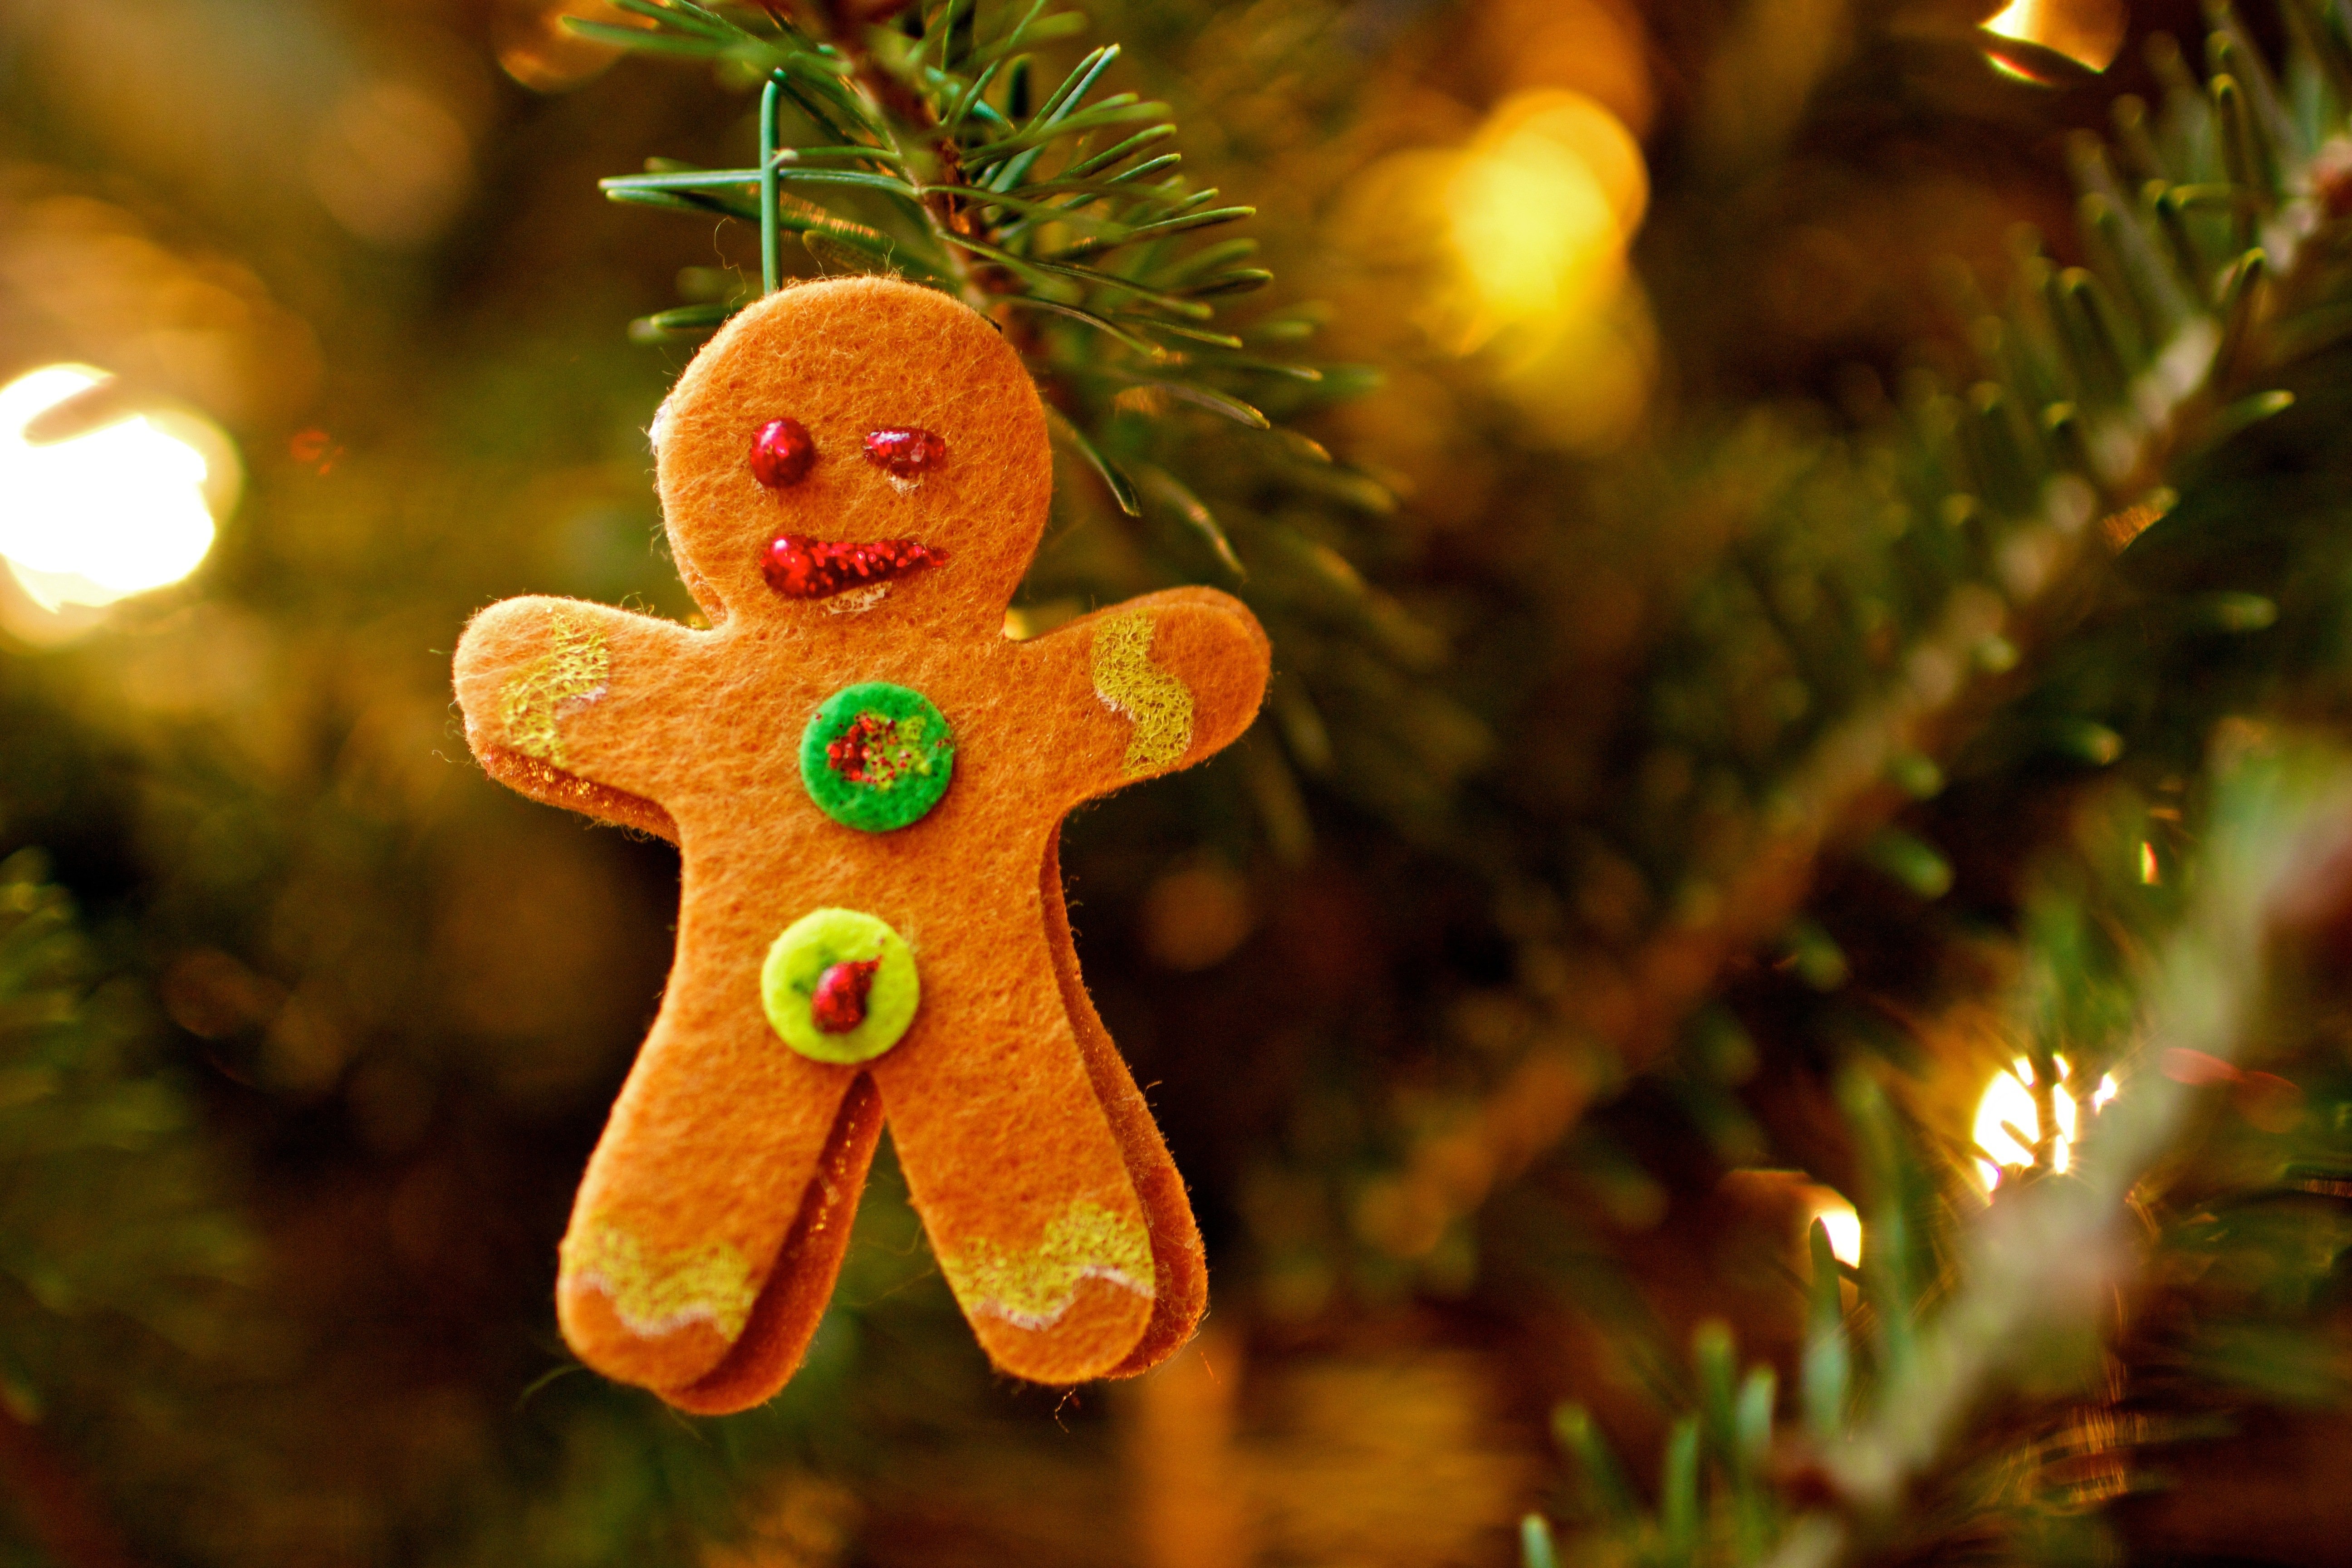 7 Christmas Decorations That You Can Make With Your Kids